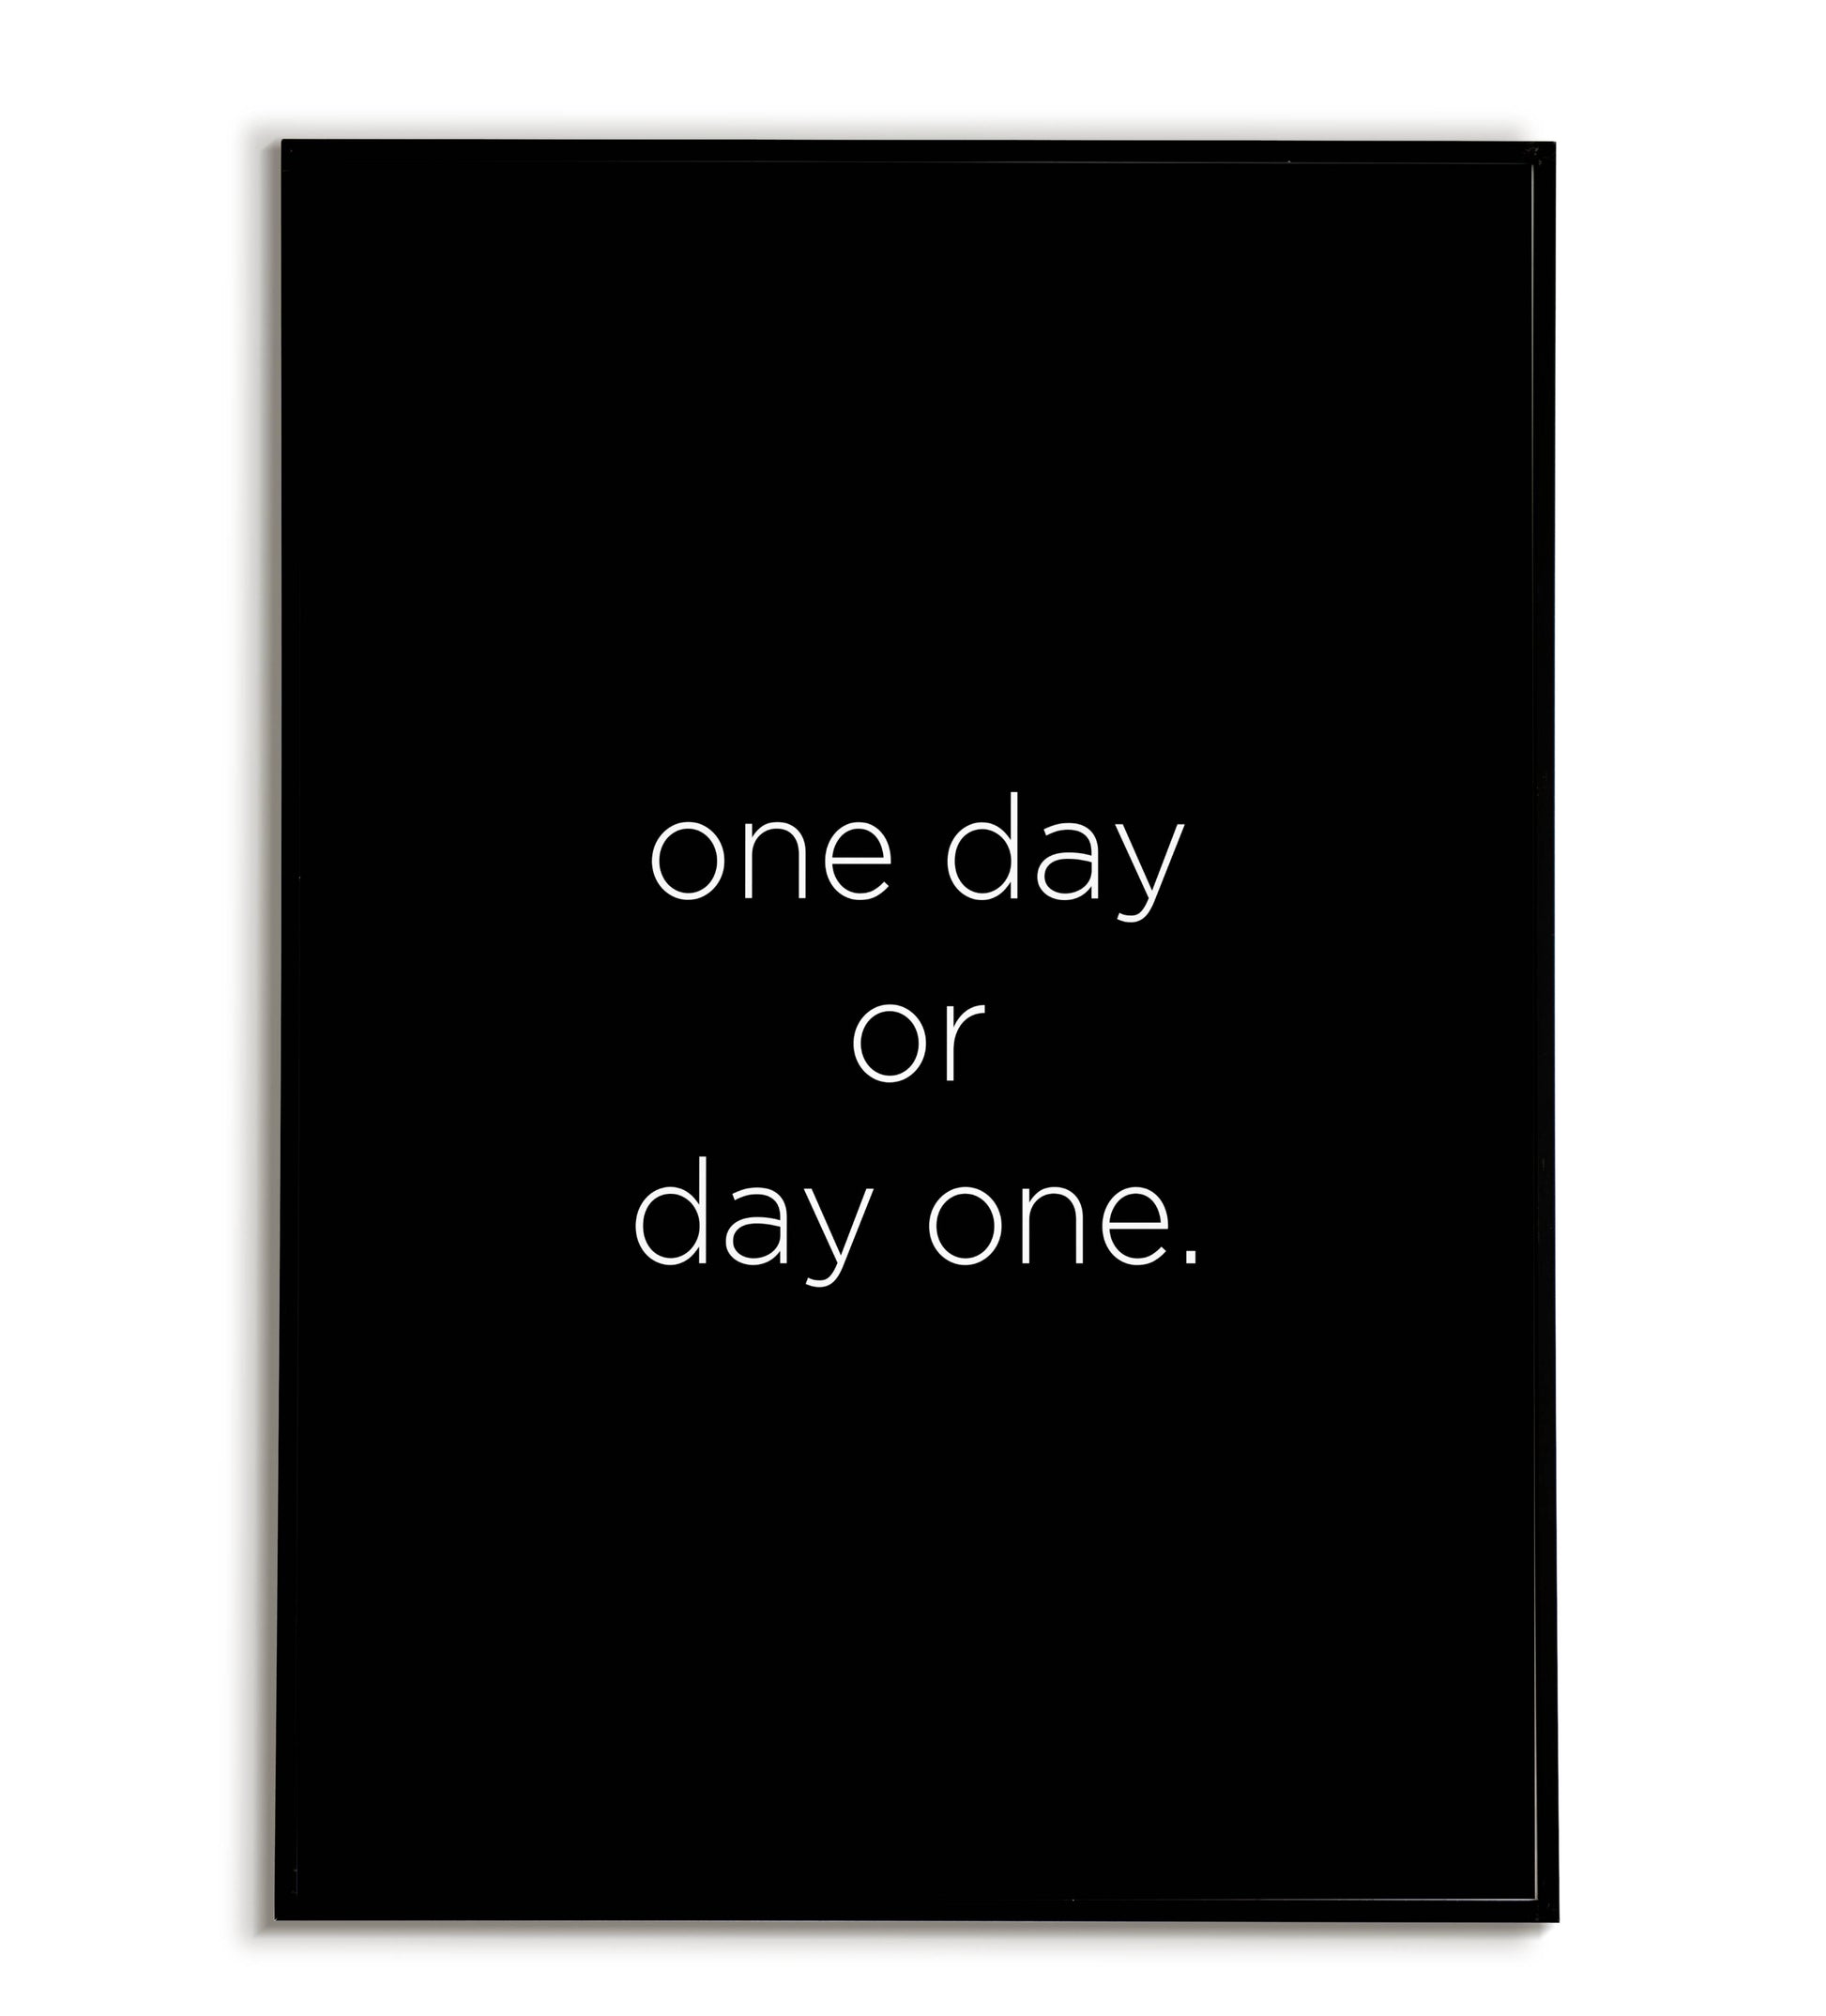 One day or day one printable wall art poster. Motivational message about taking action.